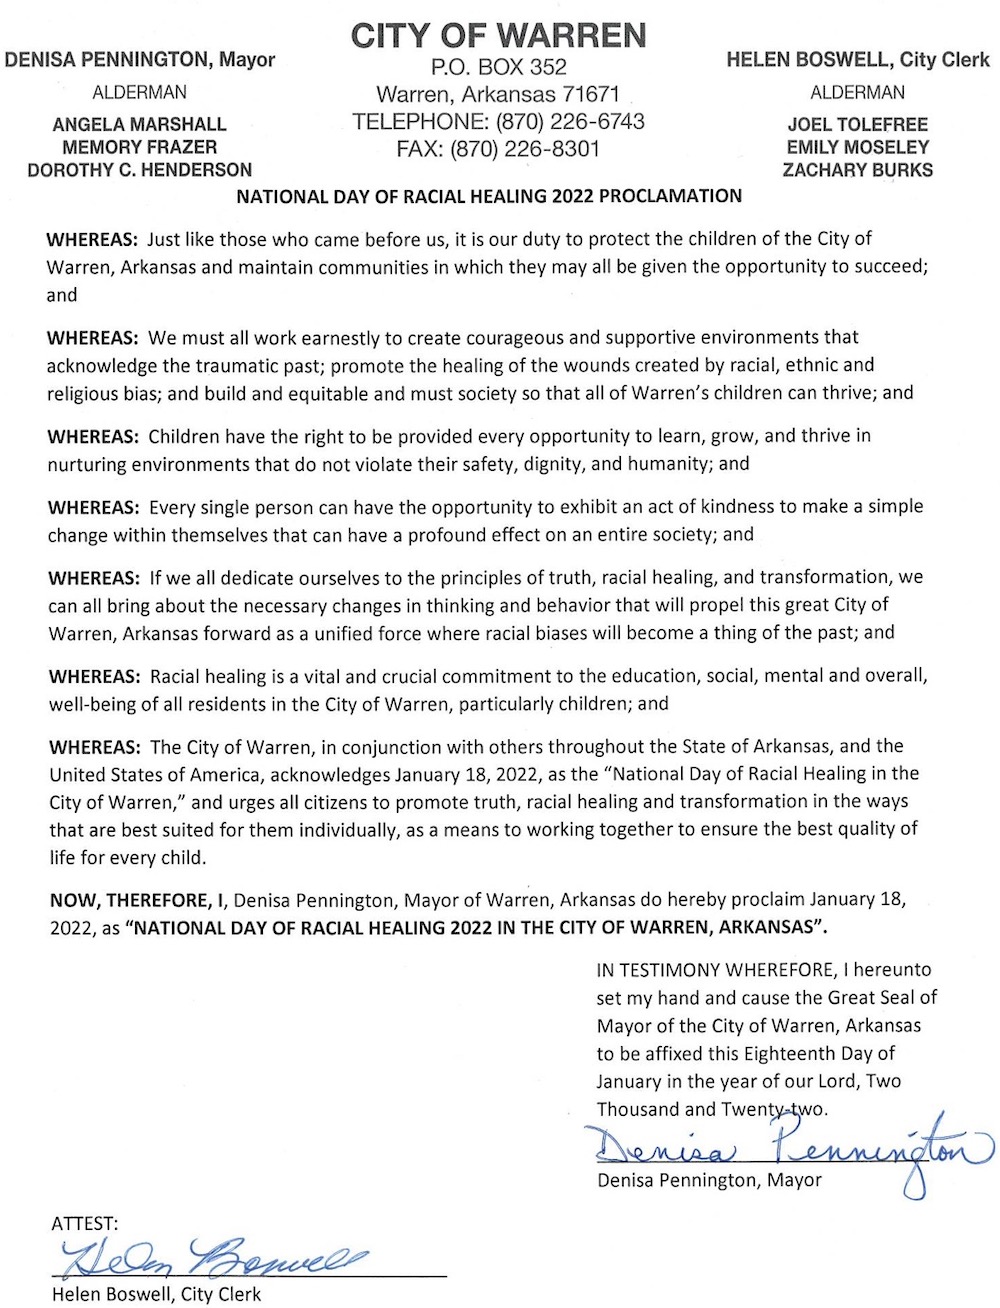 Mayor Pennington proclaims January 18, 2022 as National Day of Racial Healing 2022 in the City of Warren